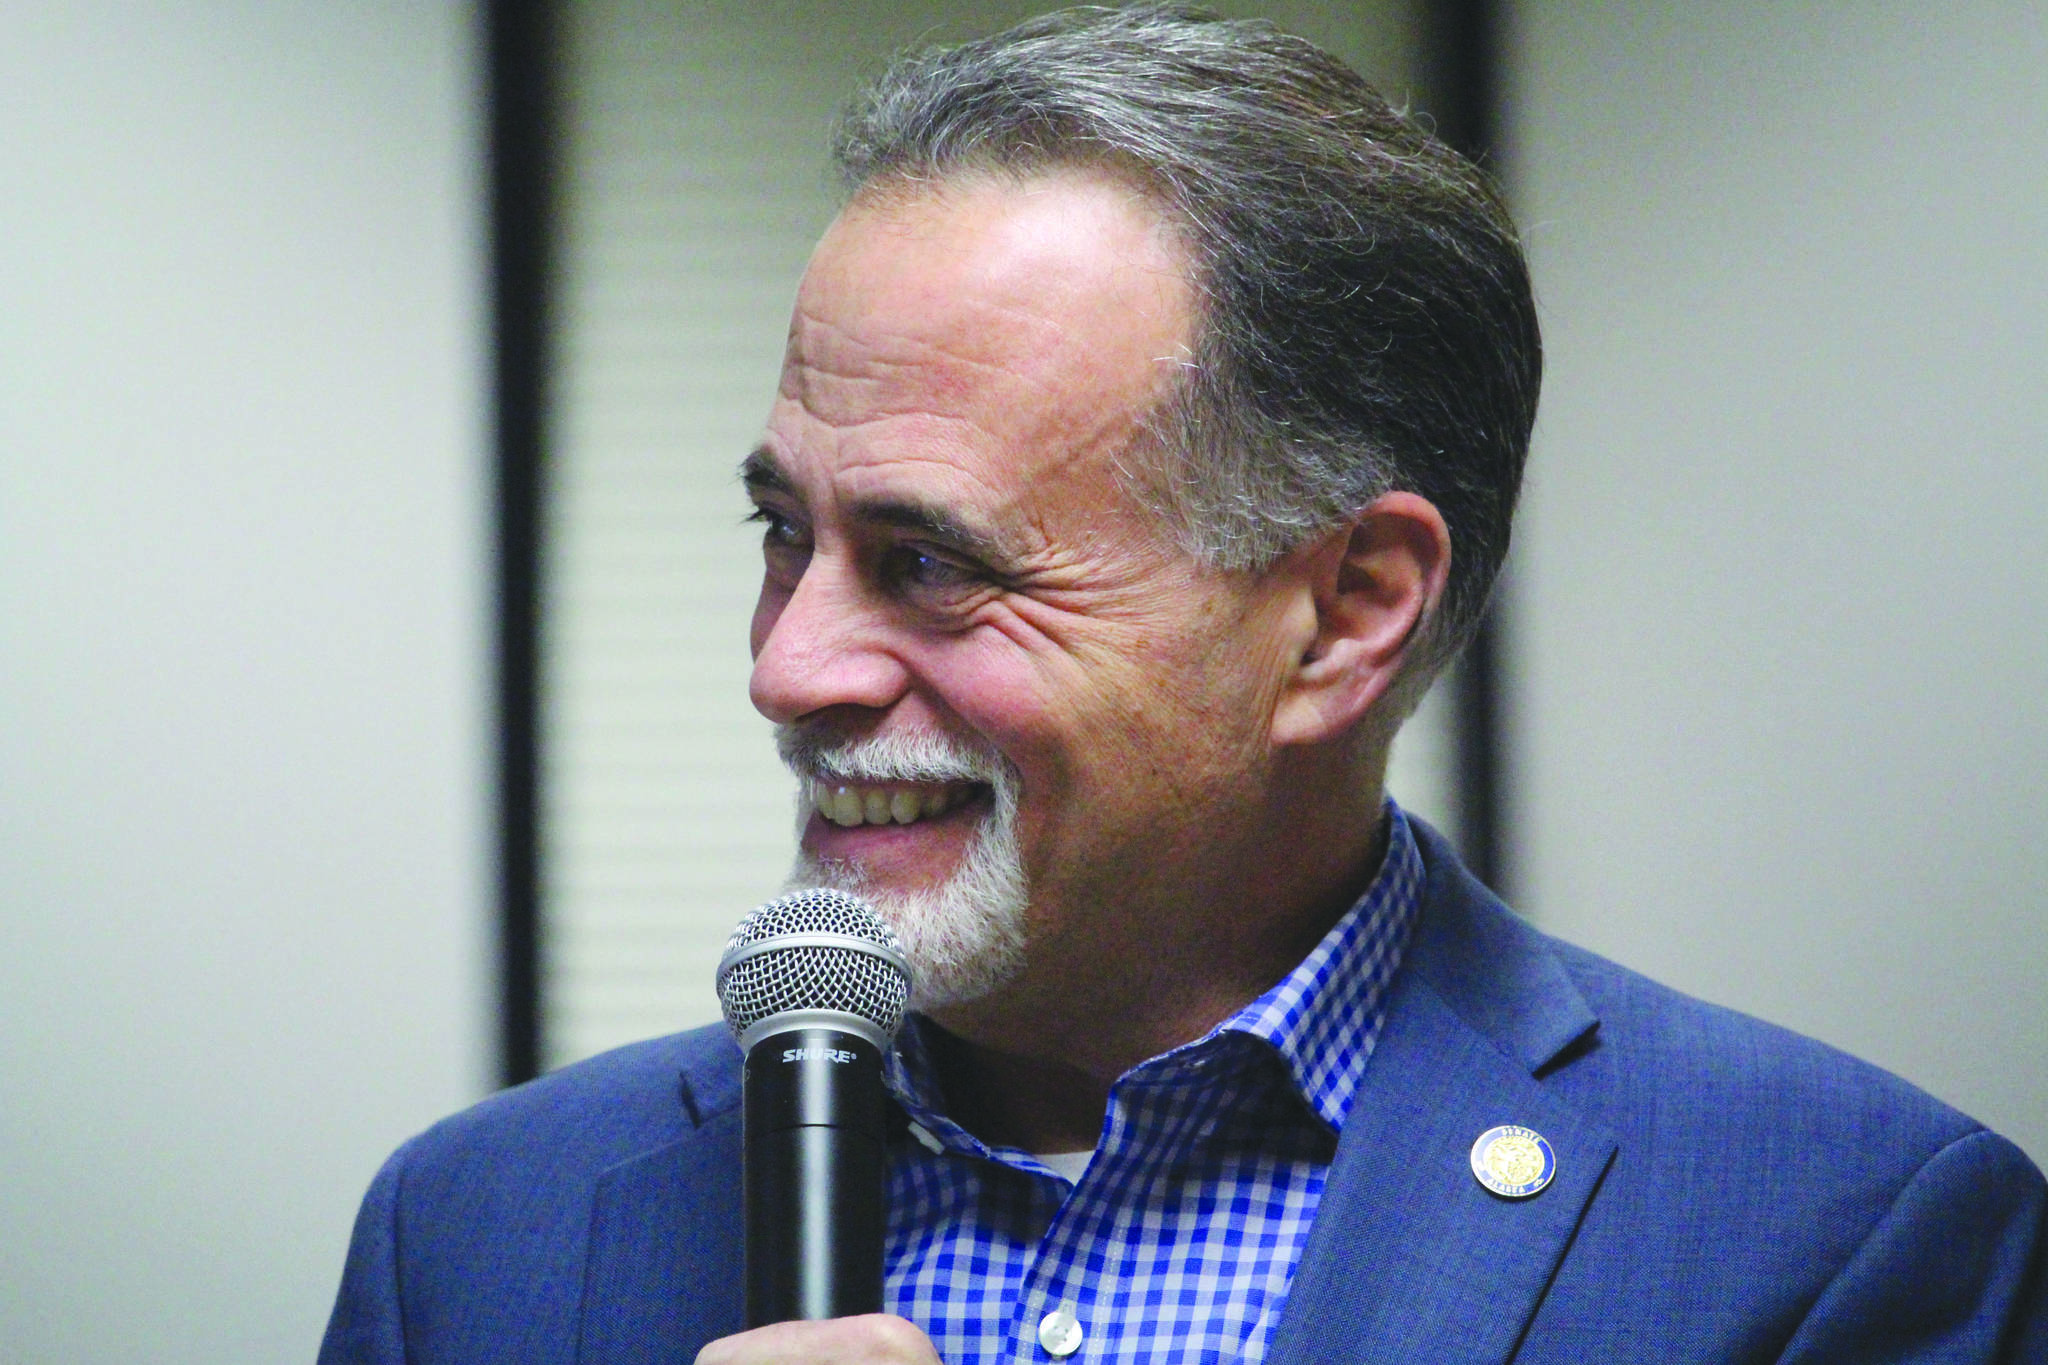 Sen. Peter Micciche (R-Soldotna) speaks to constituents during a town hall at the Betty J. Glick Assembly Chambers in Soldotna, Alaska on Jan. 16, 2020. (Photo by Brian Mazurek/Peninsula Clarion)